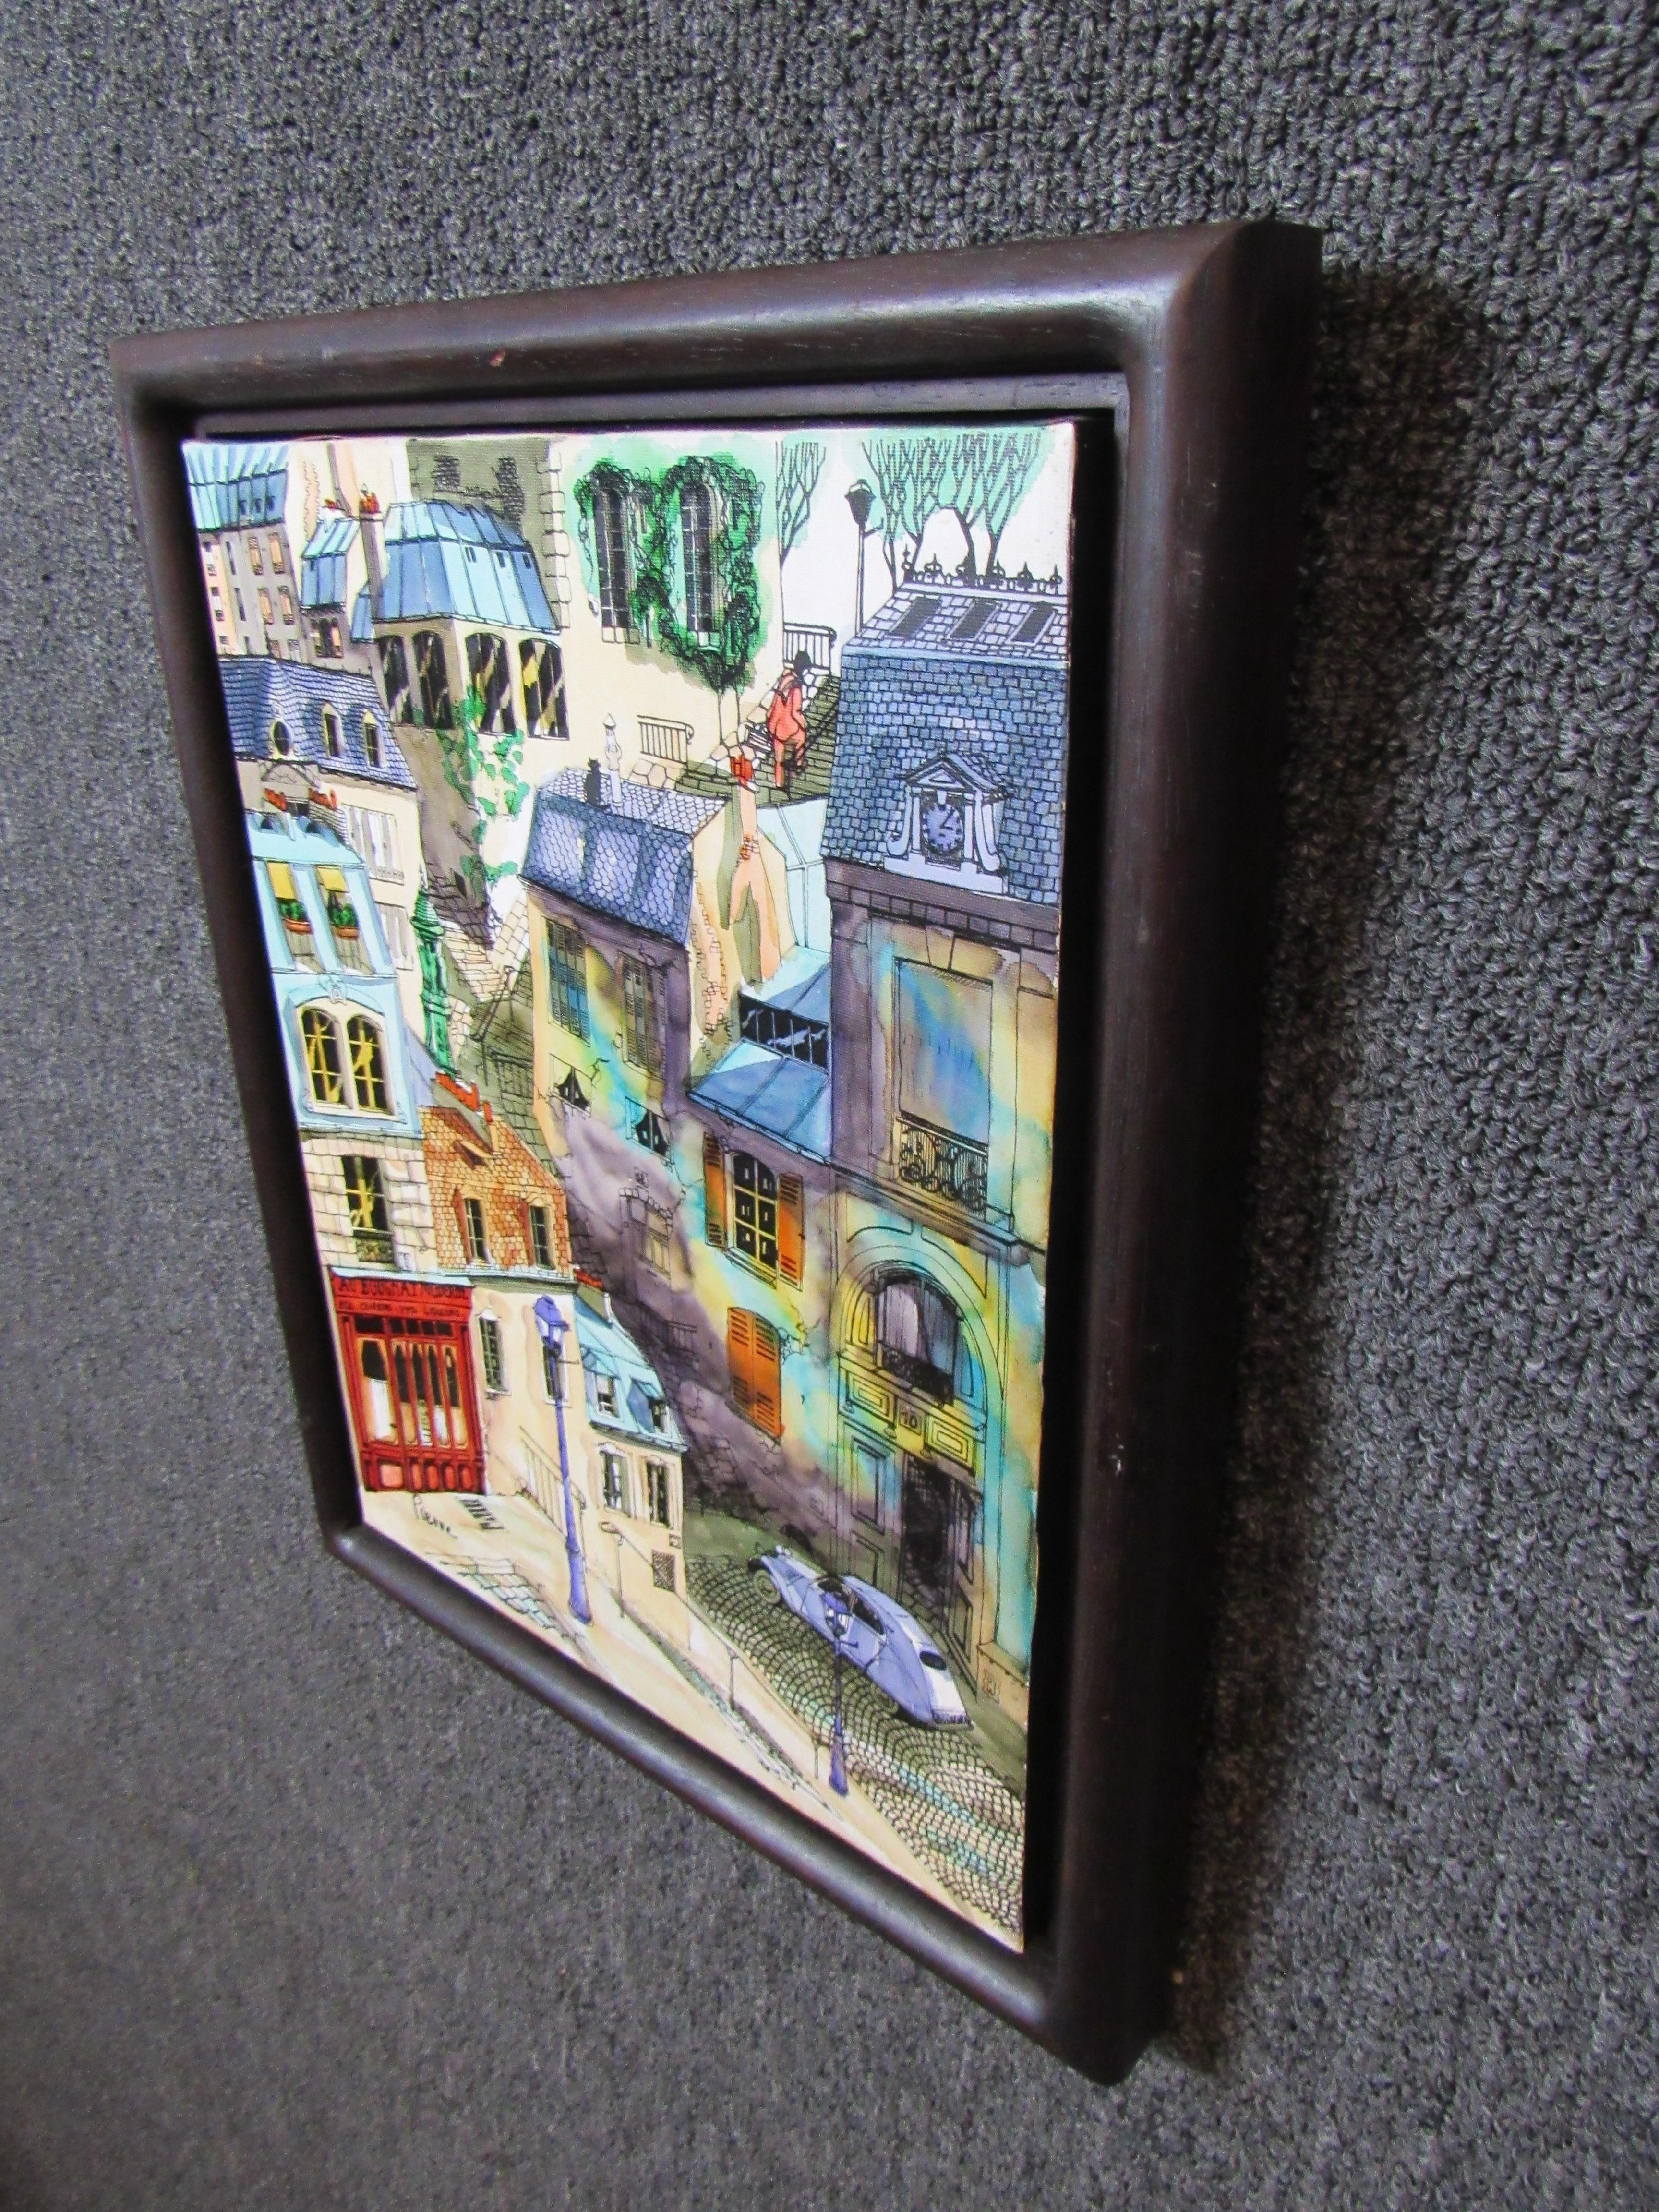 Terrific original watercolor of a Parisian side street by the artist 